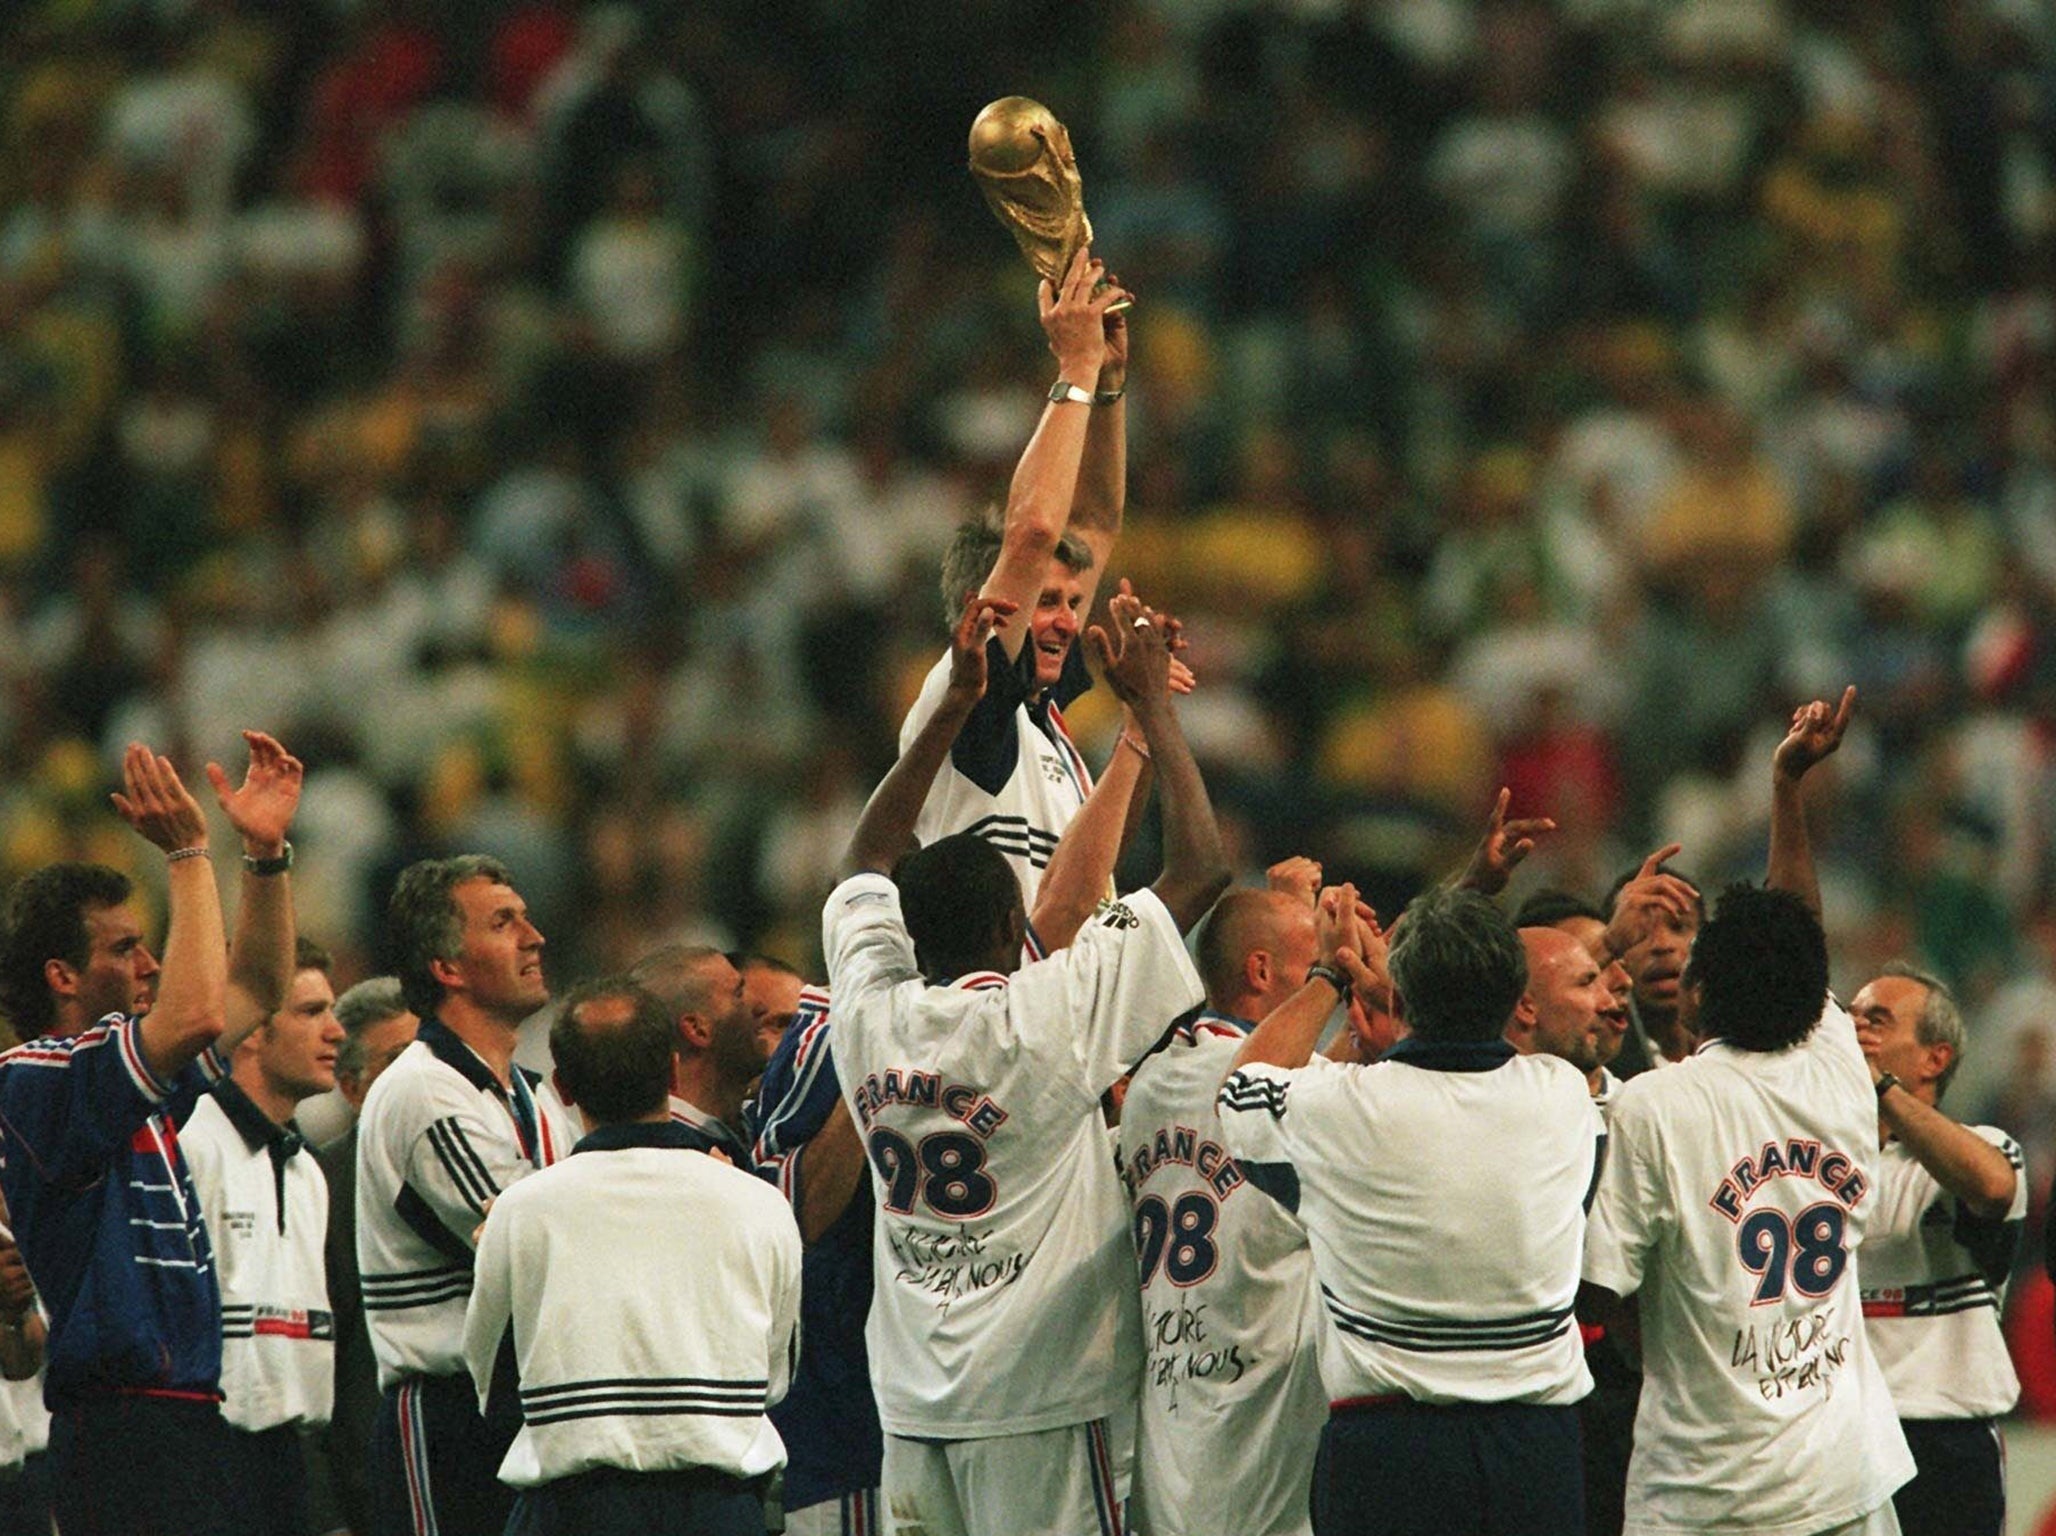 Thuram was part of the multiracial France side which won the World Cup in 1998